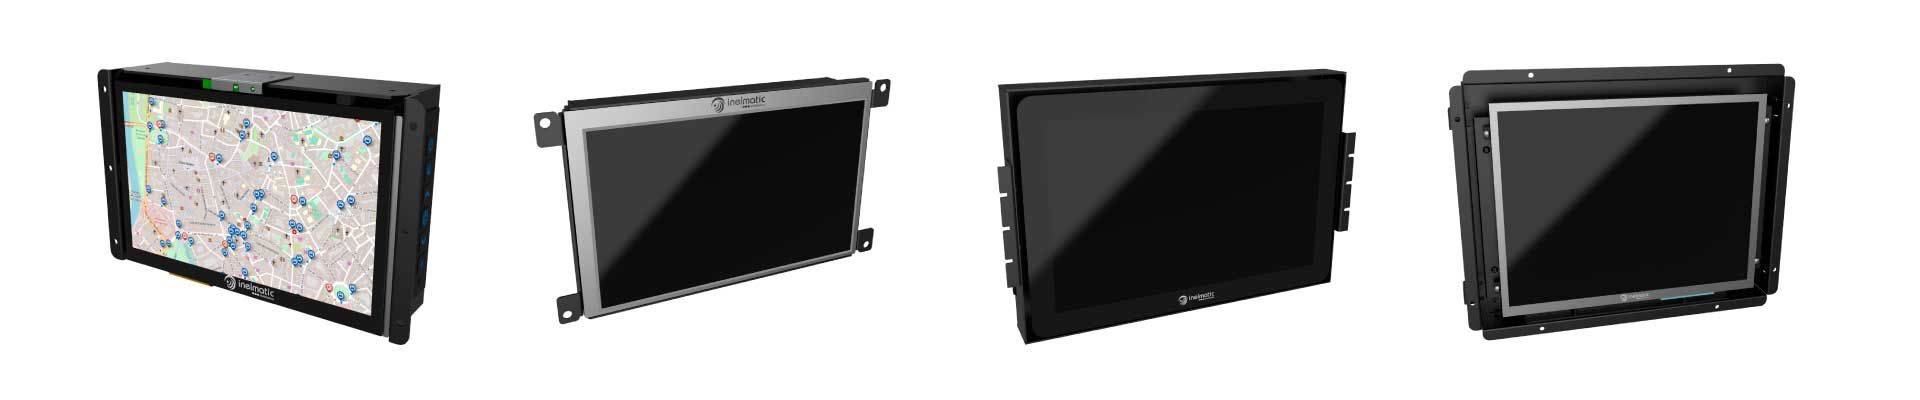 Open frame monitors and displays - Inelmatic